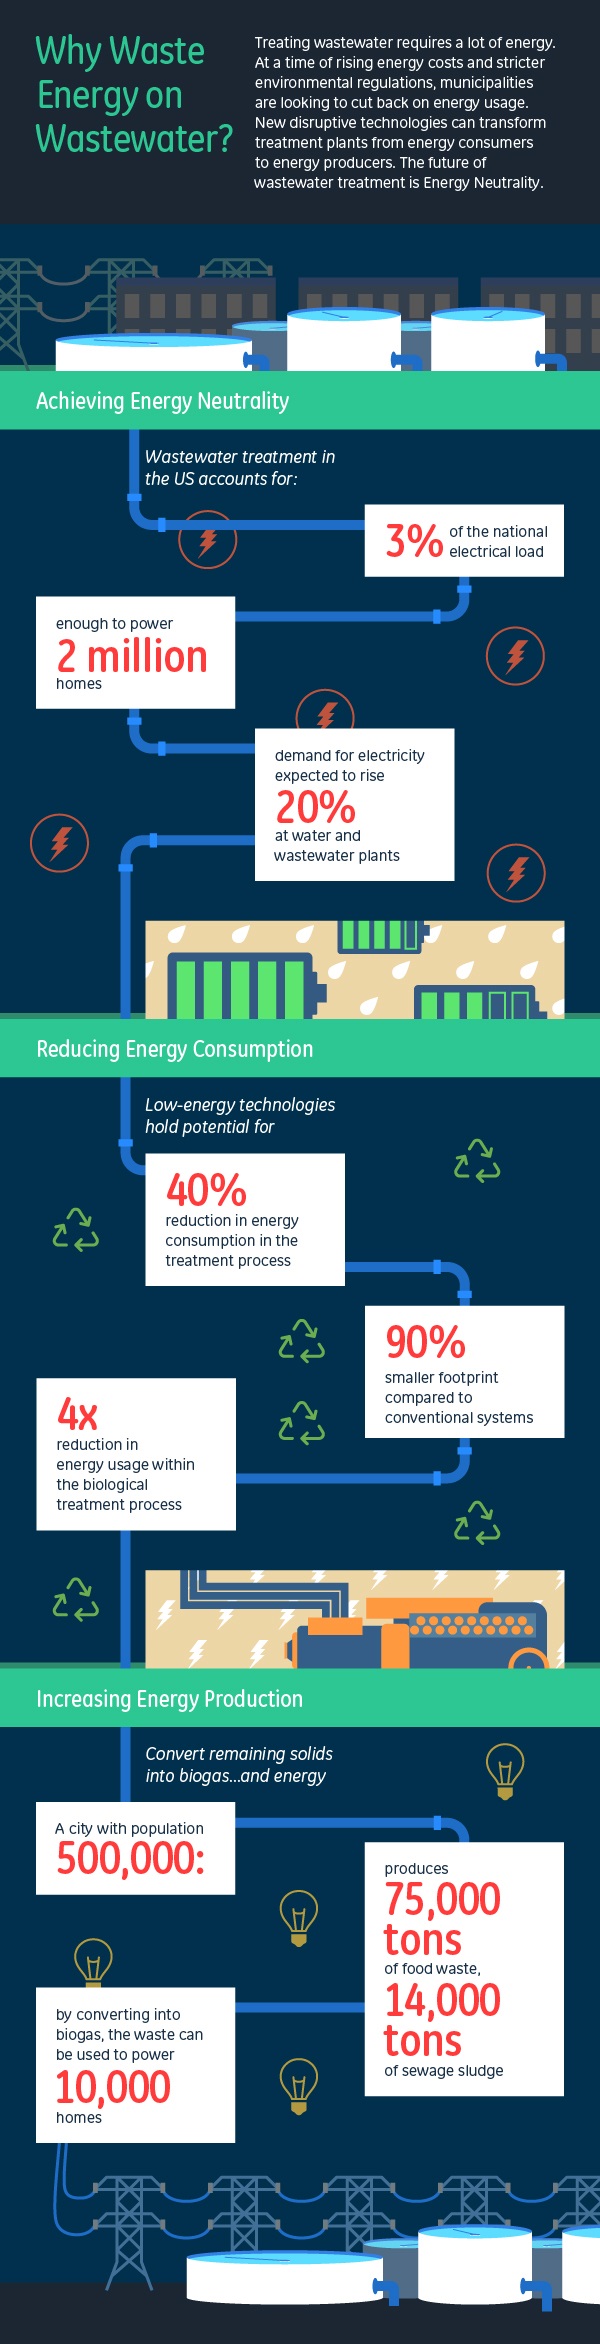 GE_Infographic_wastewater_energy_Revised